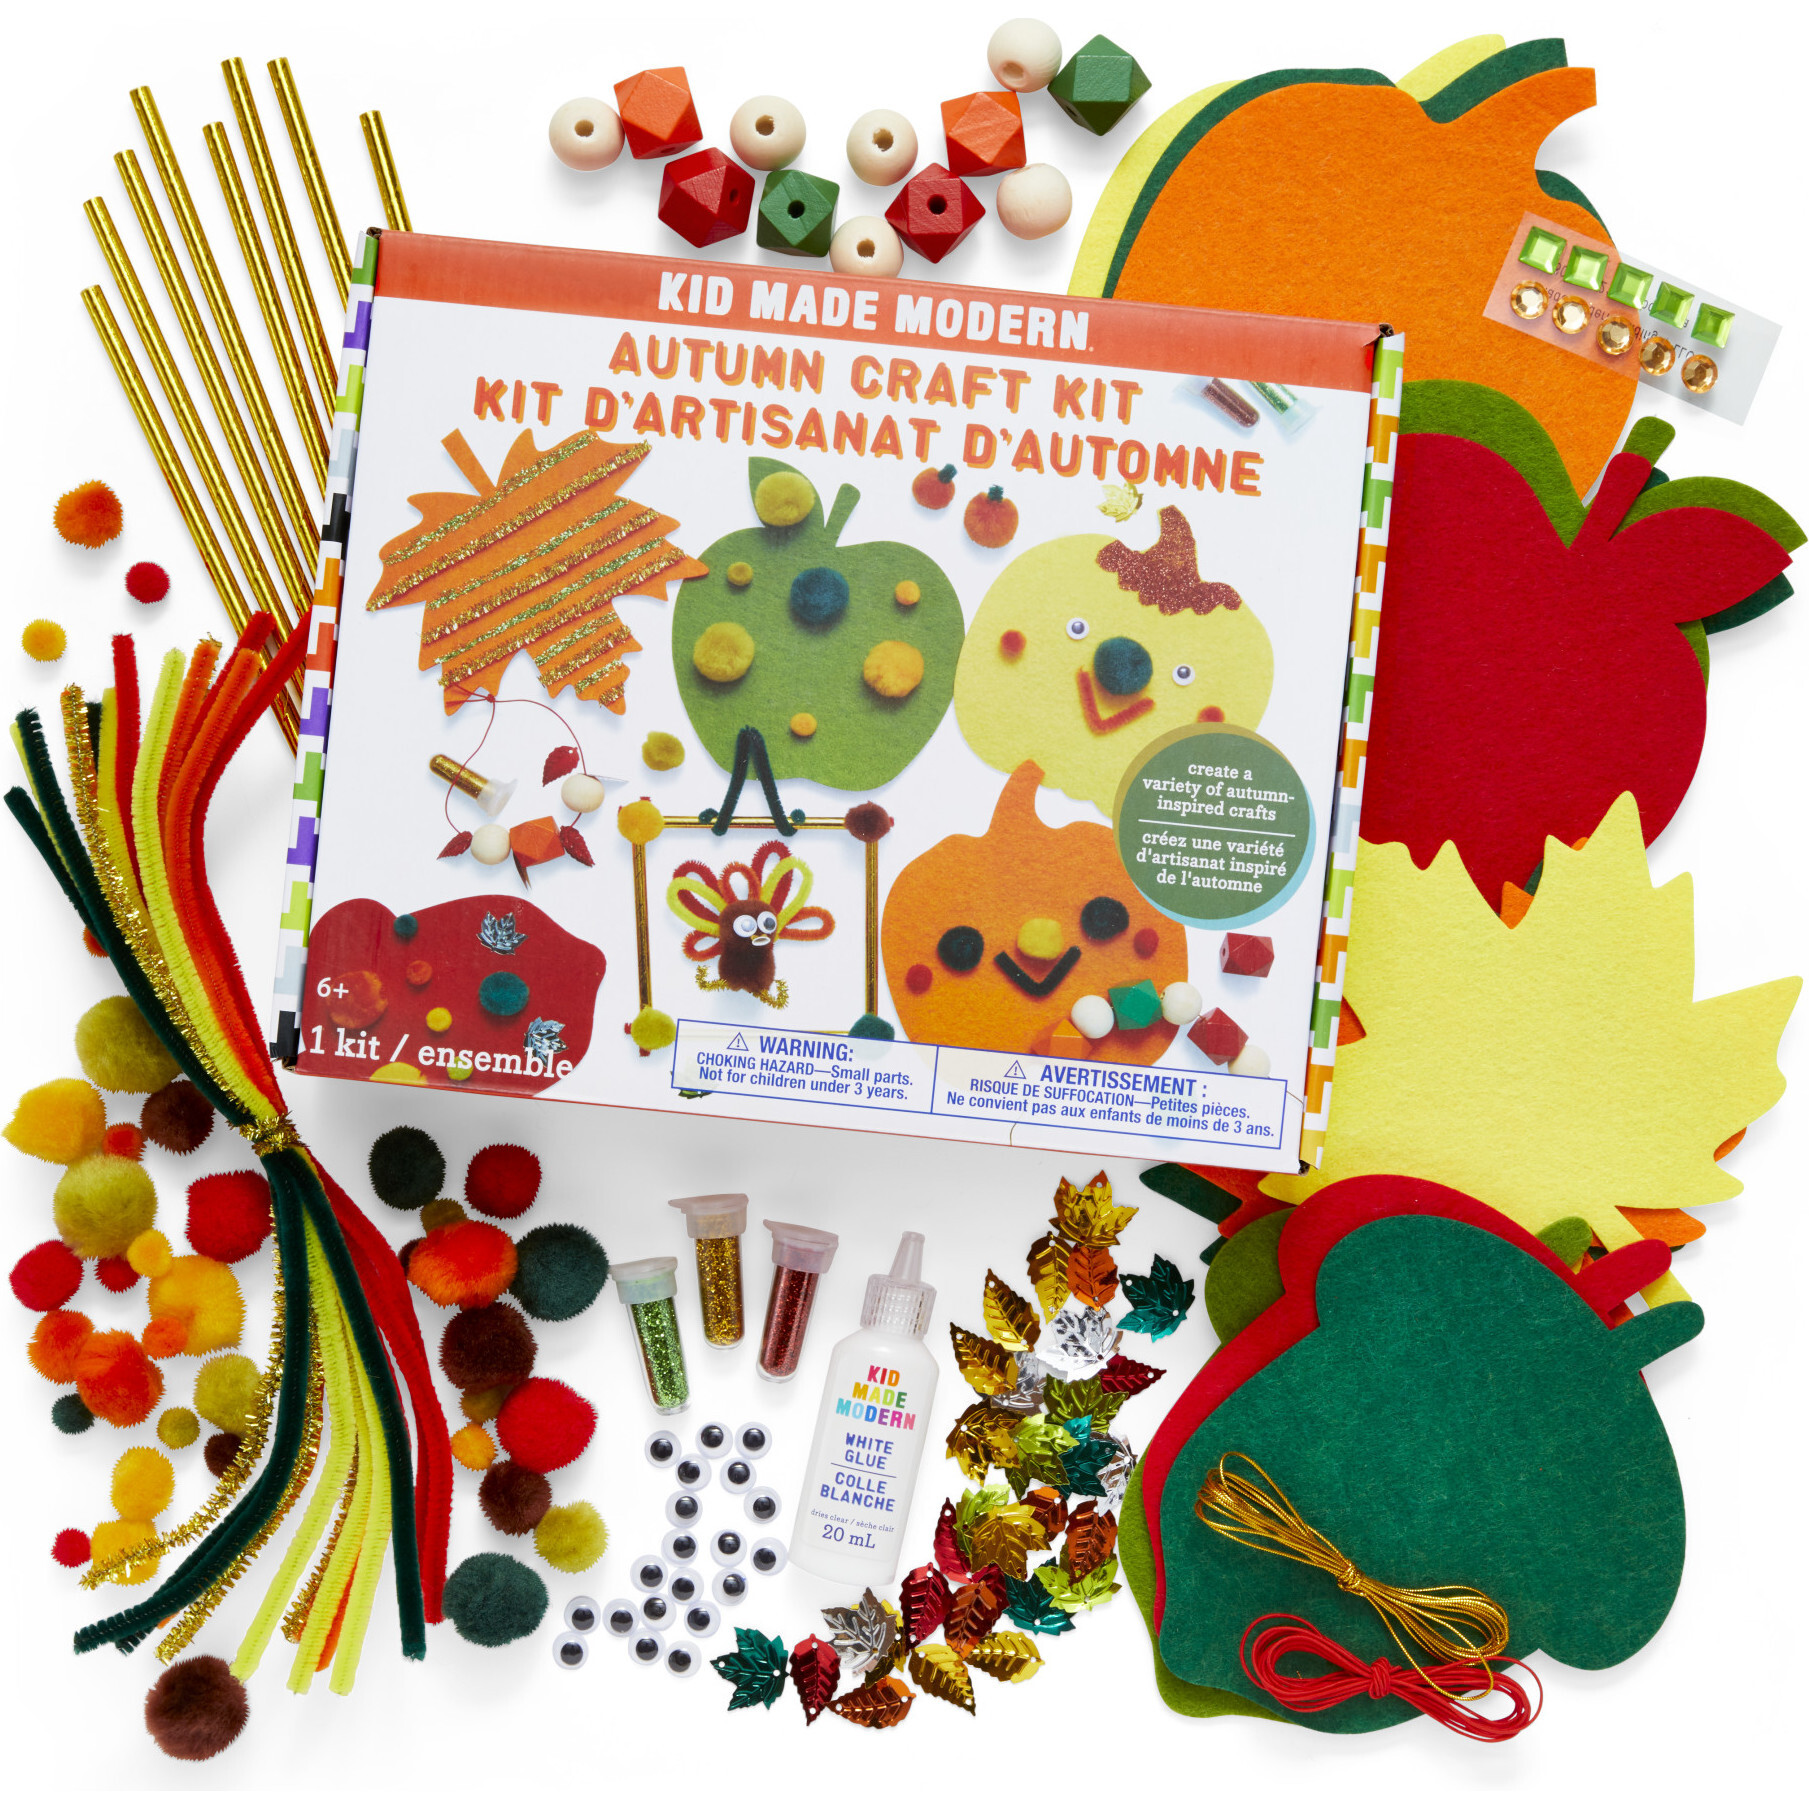 NEW AUTUMN TIME CRAFT KIT CRAFTS CHILDREN PARTY BAGS 